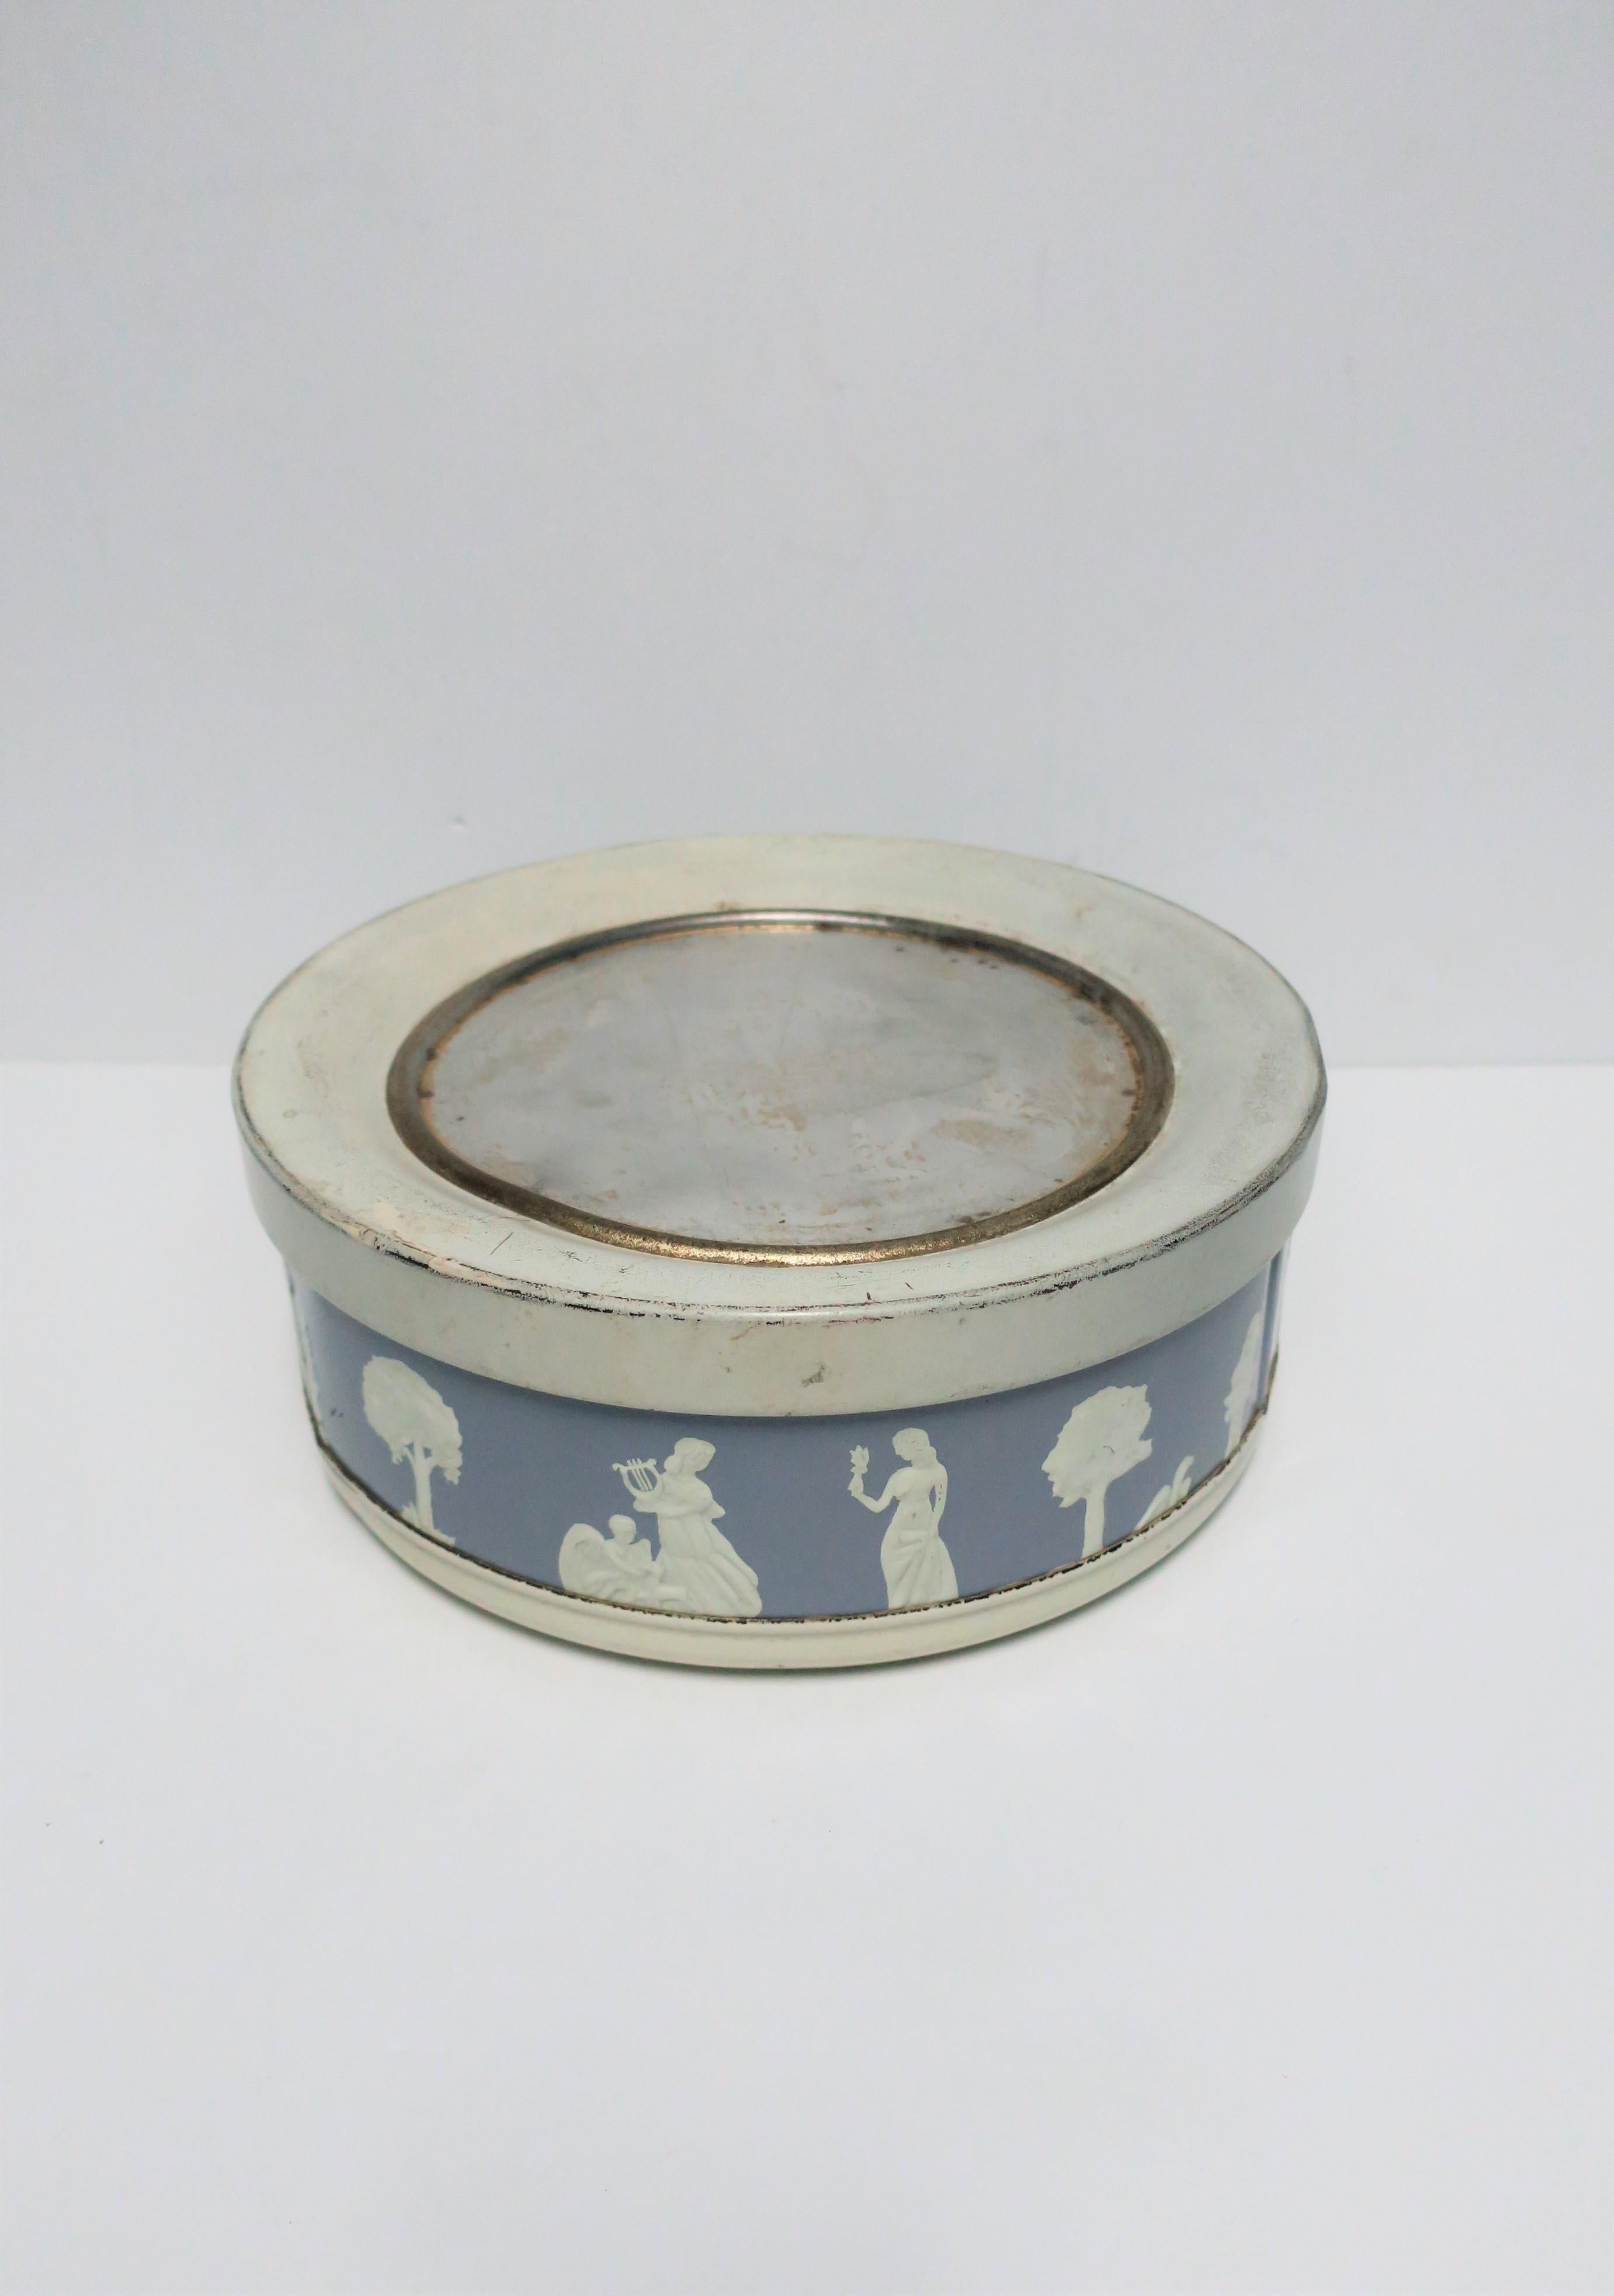 English Neoclassical Round Box in the Style of the Wedgwood For Sale